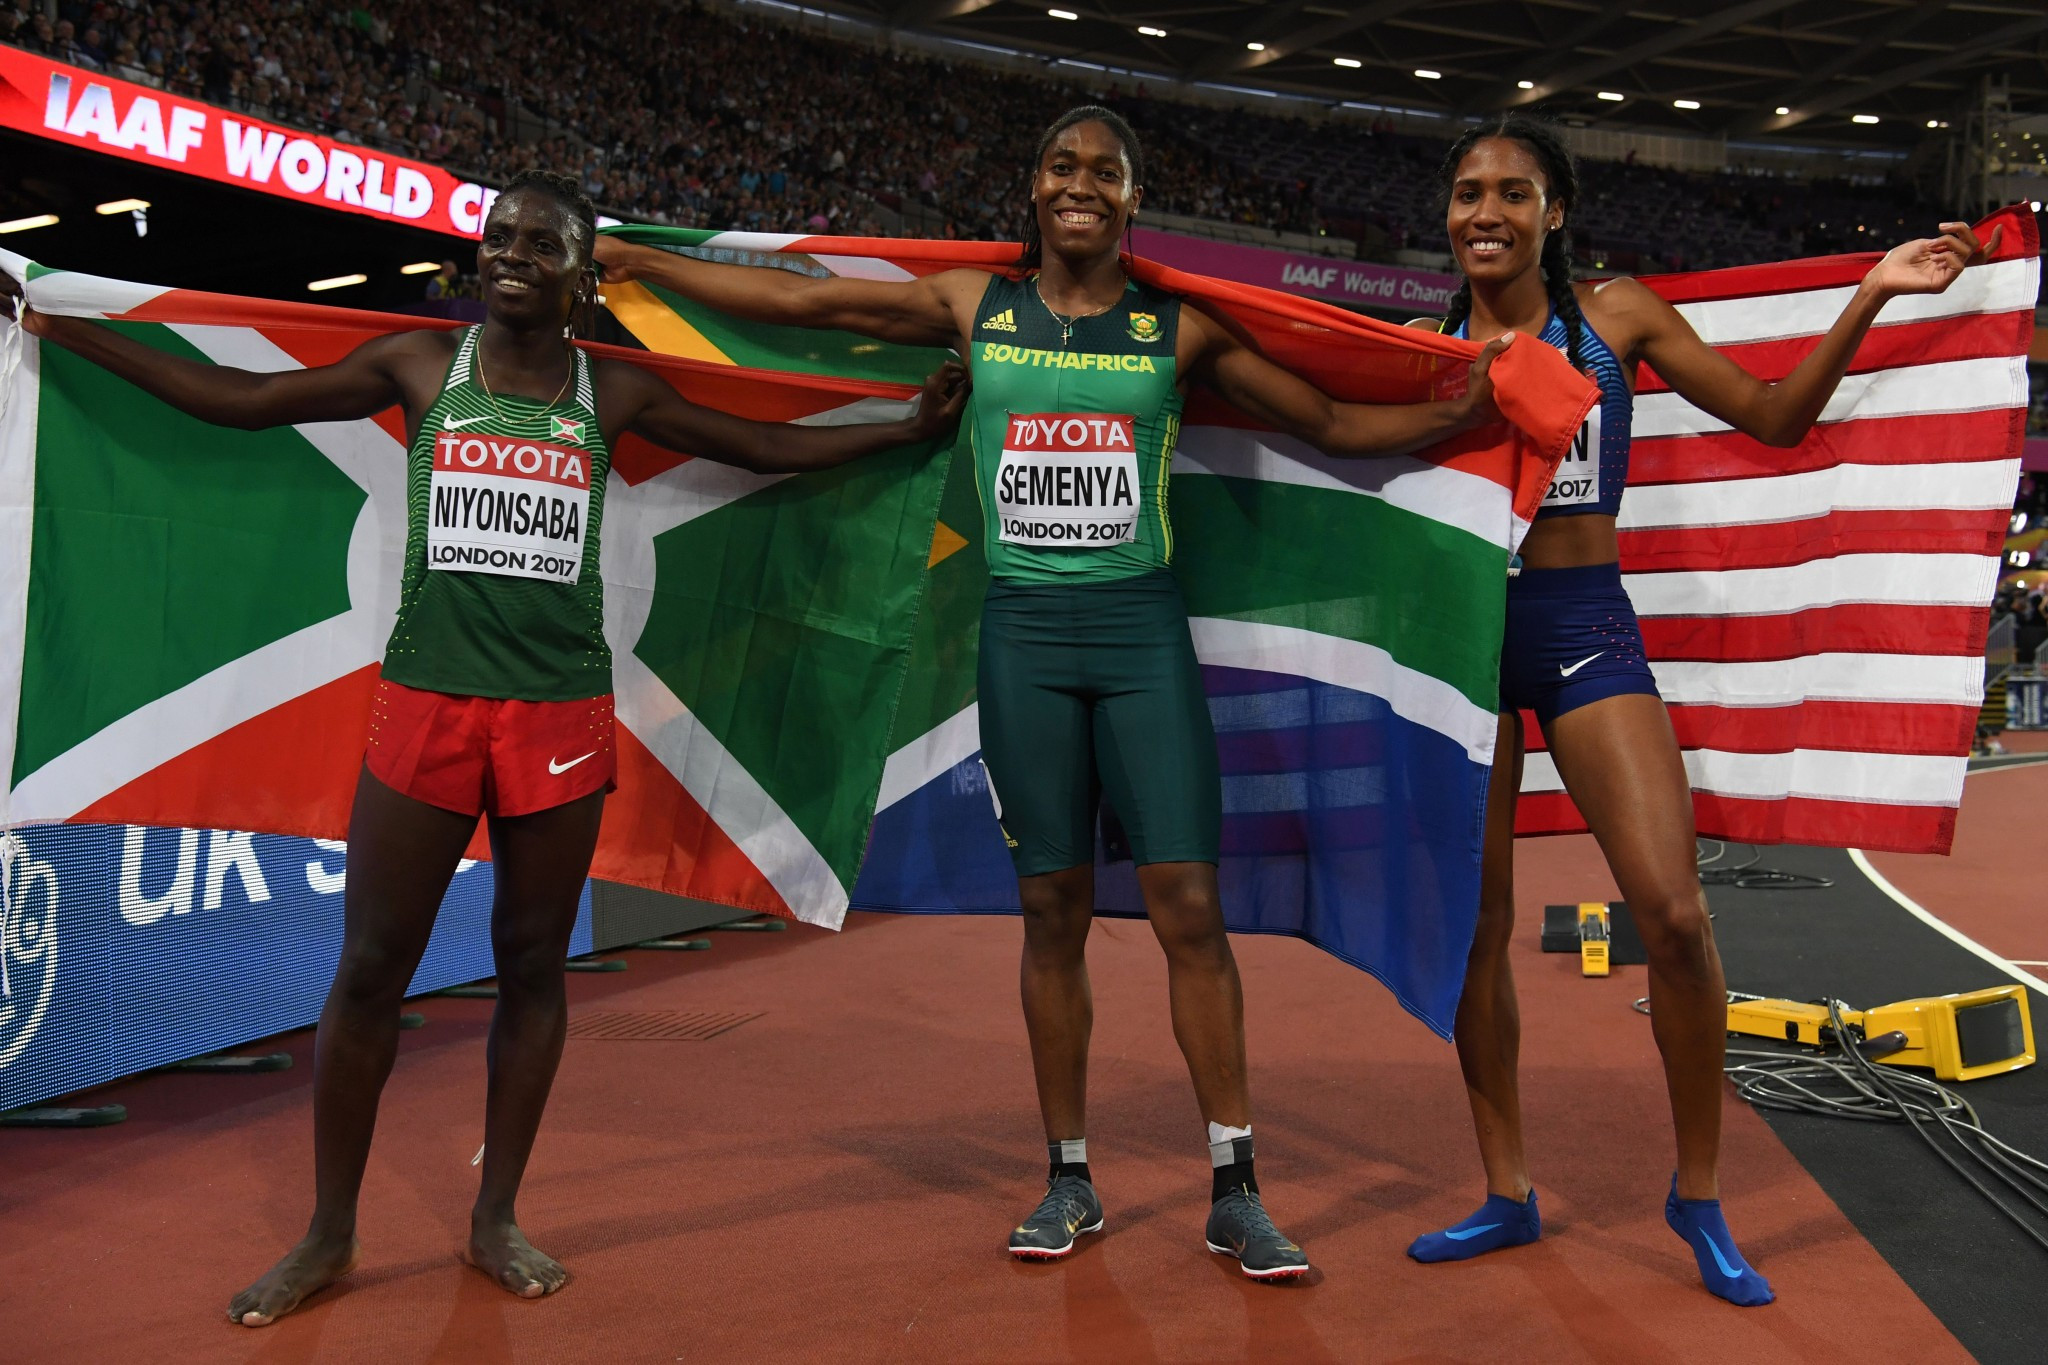 The South African stormed away from the rest of the field in the home straight to win gold ©Getty Images